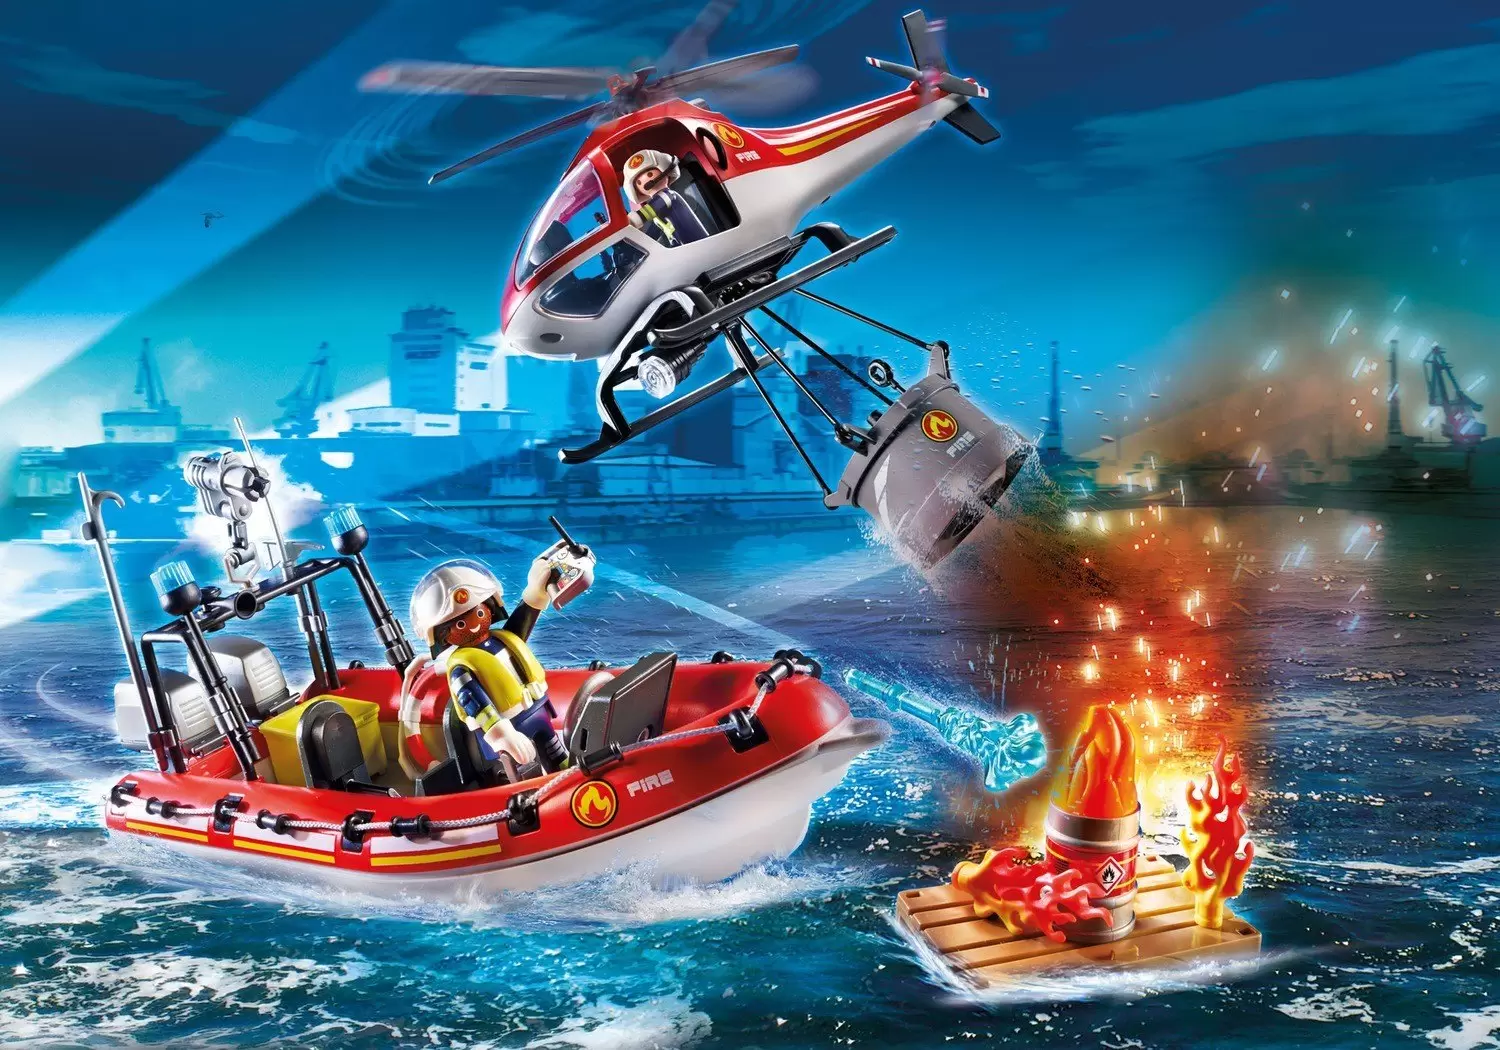 Playmobil Rescuers & Hospital - Fire brigade with boat and helicopter (PROMO PACK)